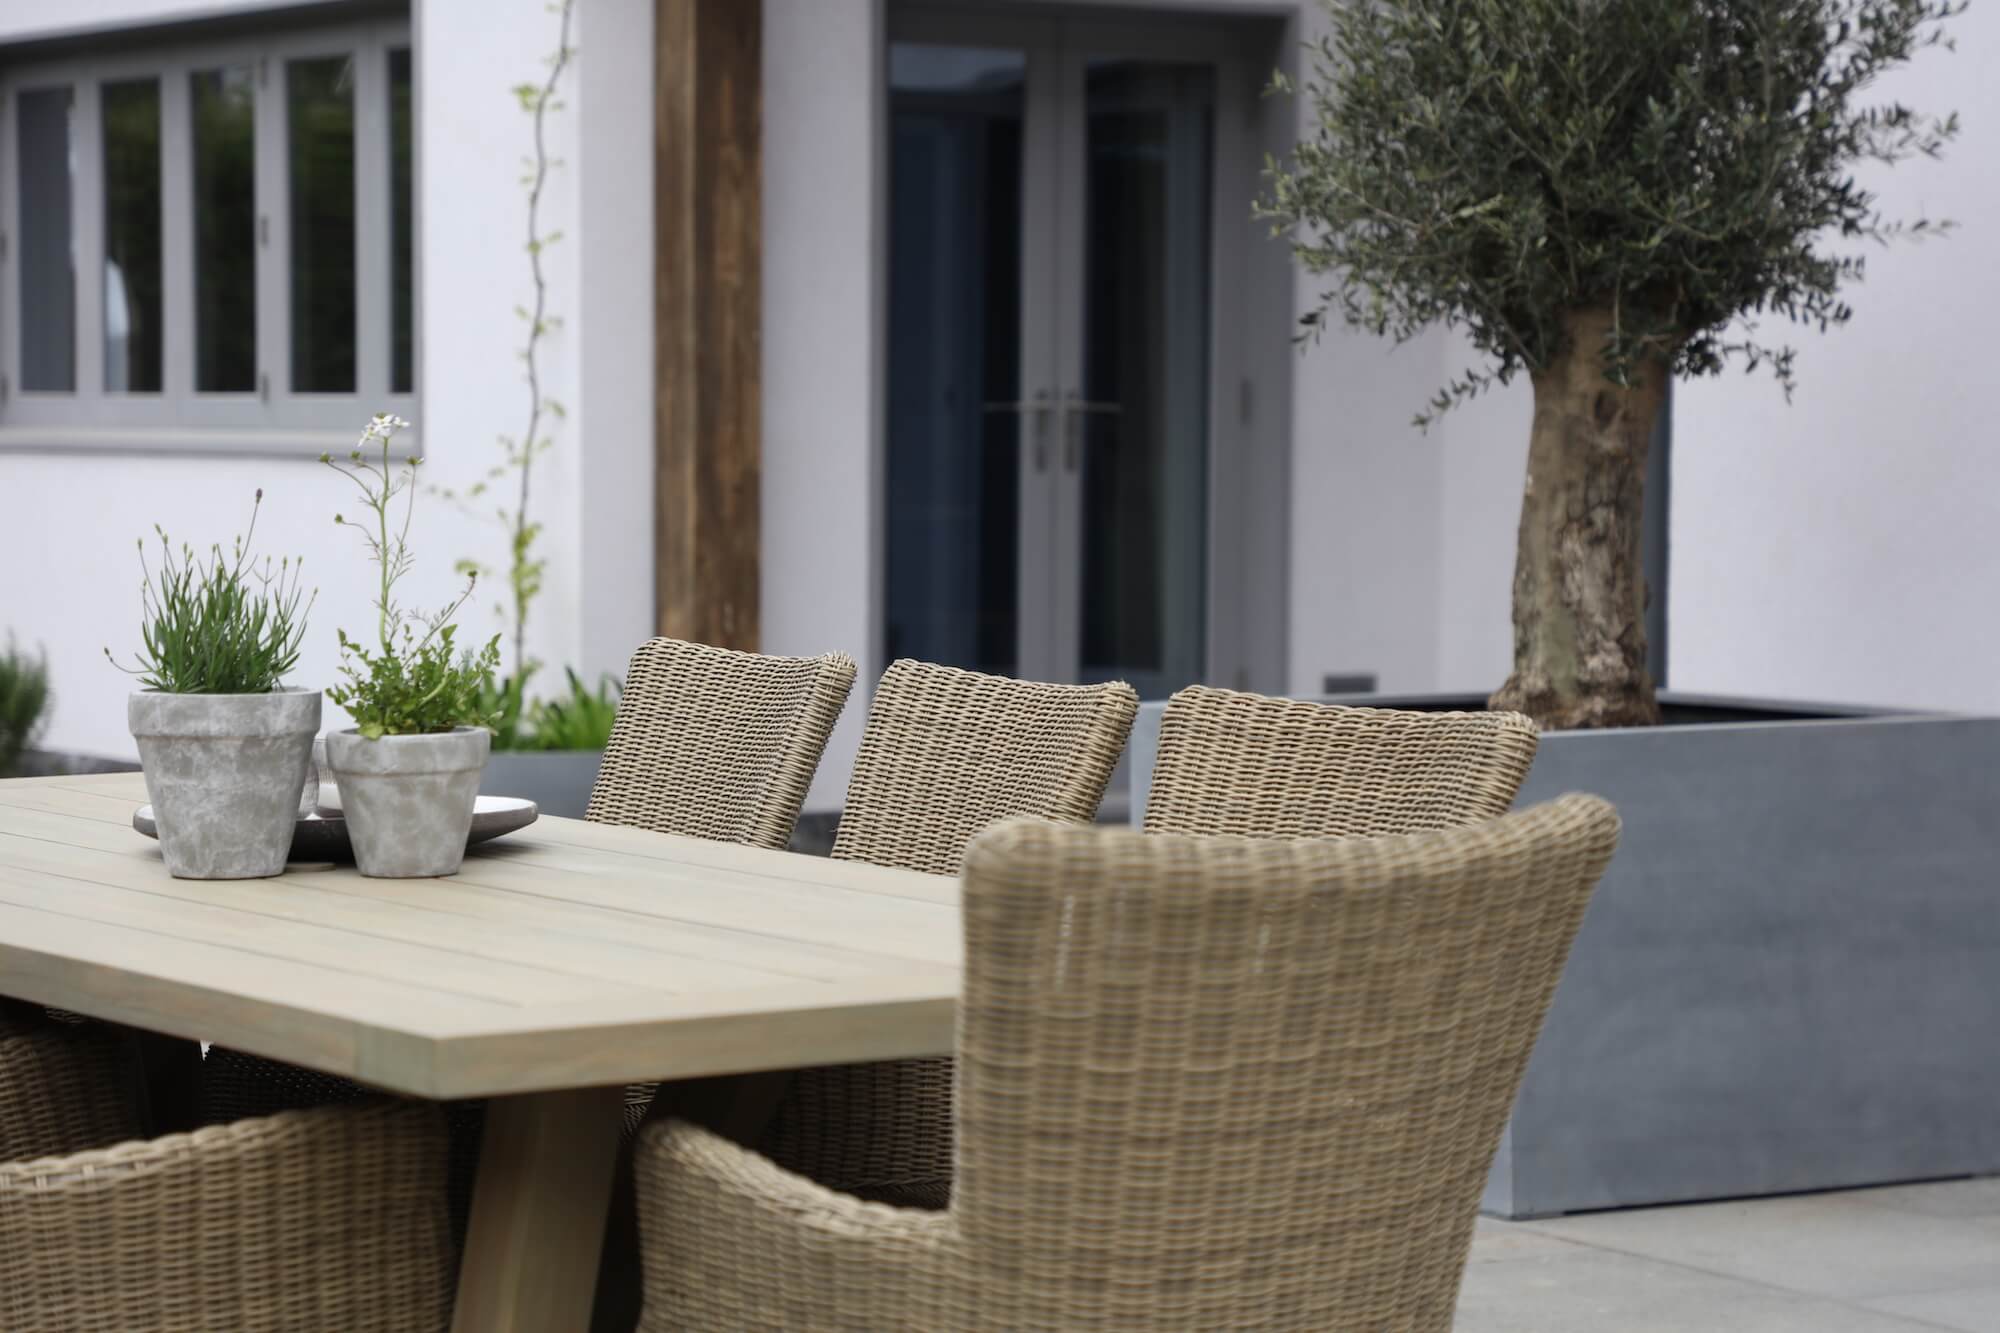 garden table with wicker chairs alfresco dining